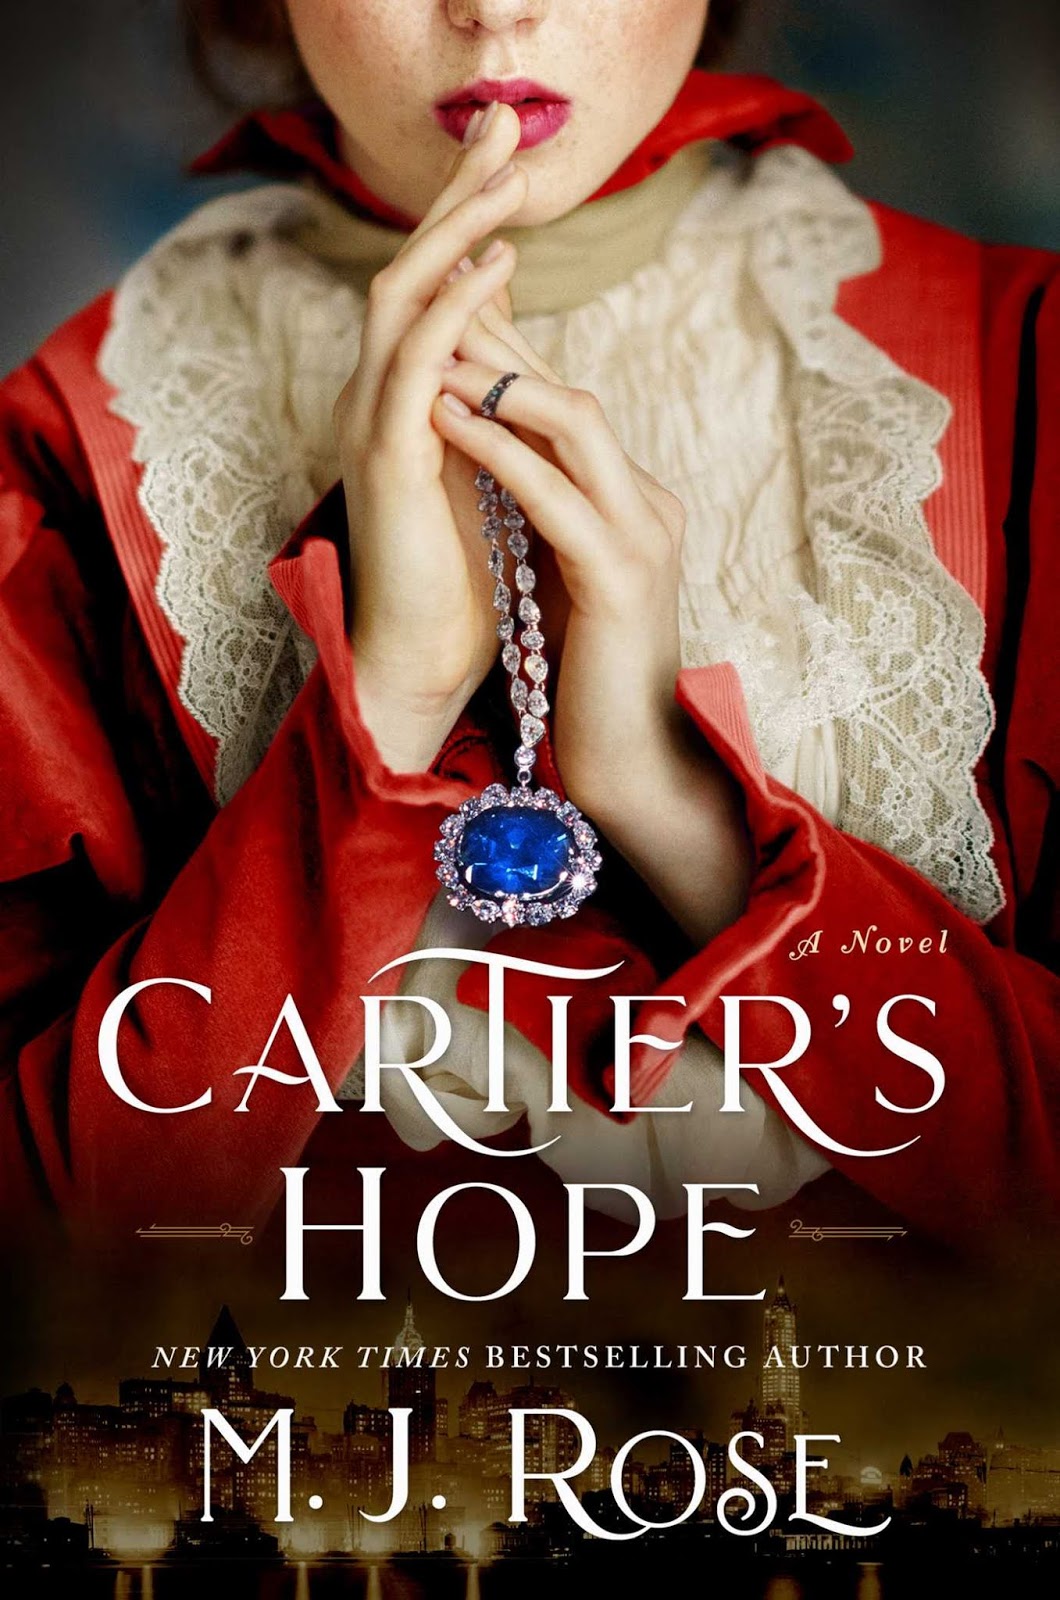 Review: Cartier’s Hope by M.J. Rose